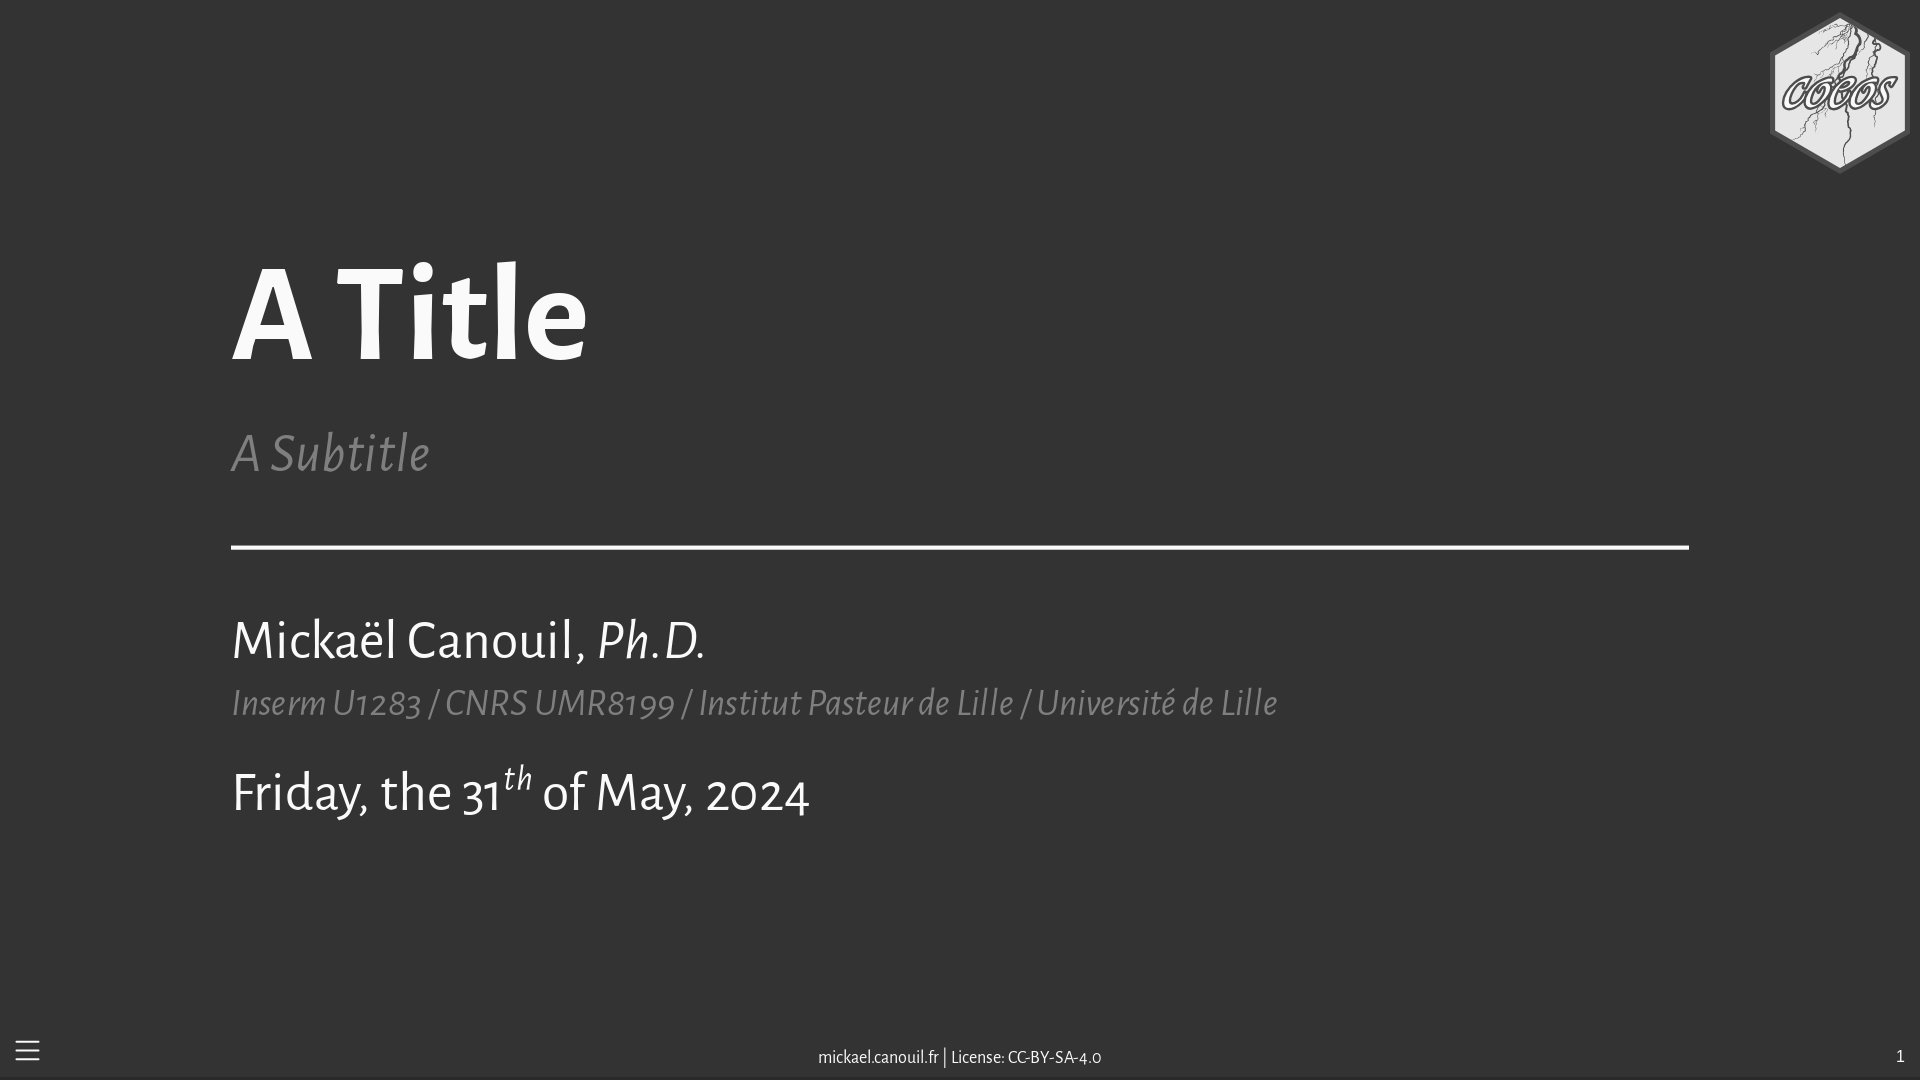 Screenshot of a dark grey title slide with a logo in the top right corner, a block left aligned in the center of the slide with a title in white, a subtitle in light grey, an horizontal rule in white, the author in white, institute in italics and light grey, and the full literal date. The footer of the slide includes from left to right, a menu icon, author and license, and the slide number.